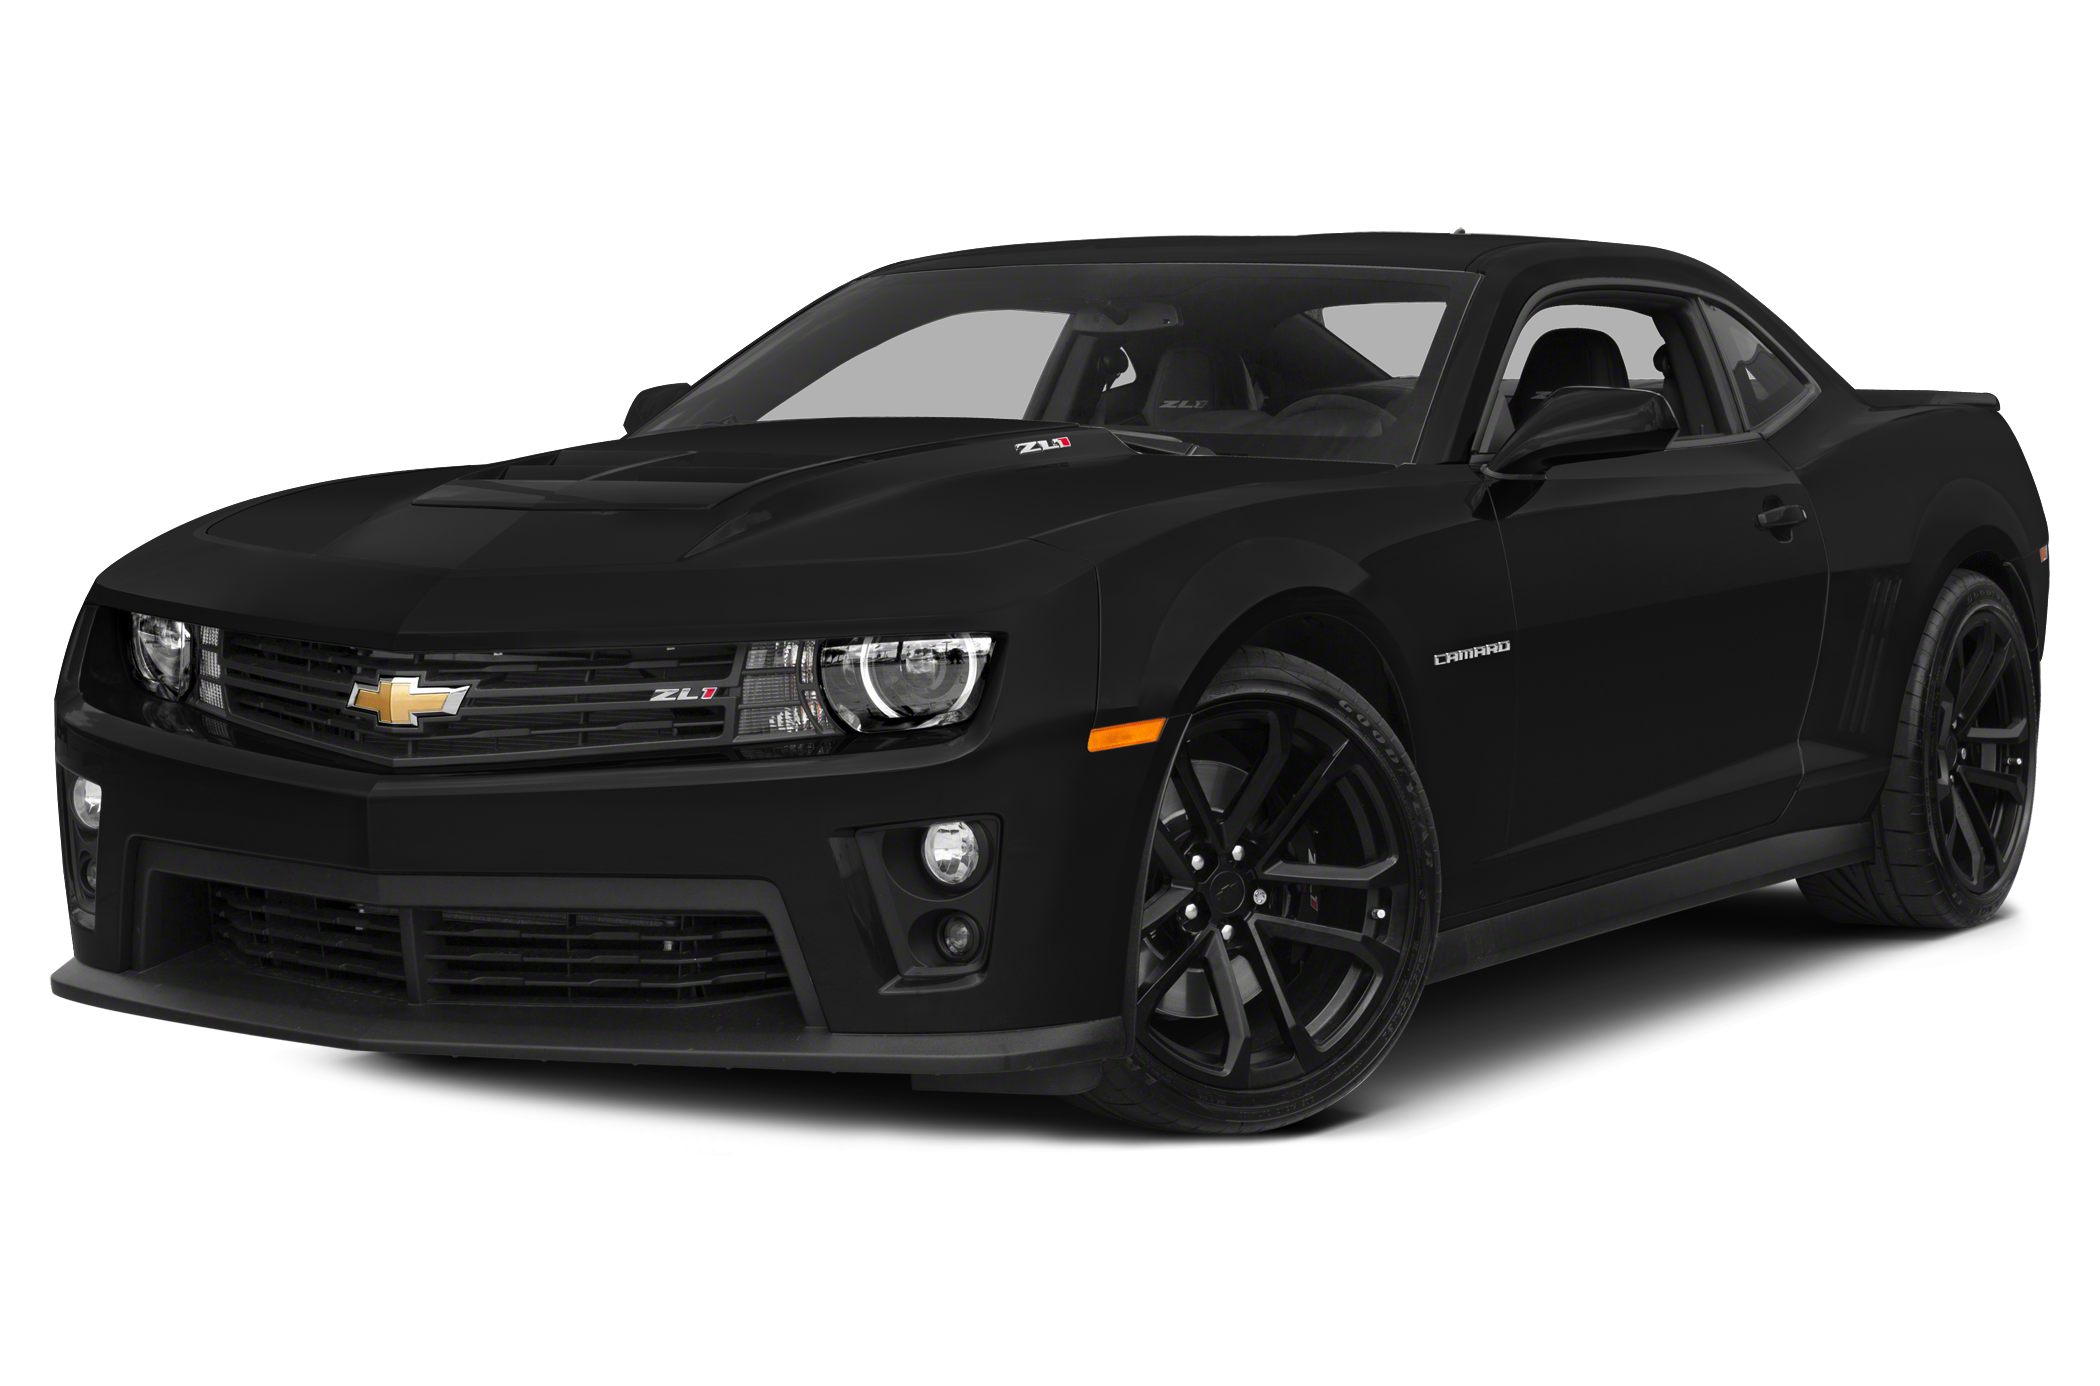 2015 Chevrolet Camaro Zl1 2dr Coupe Specs And Prices